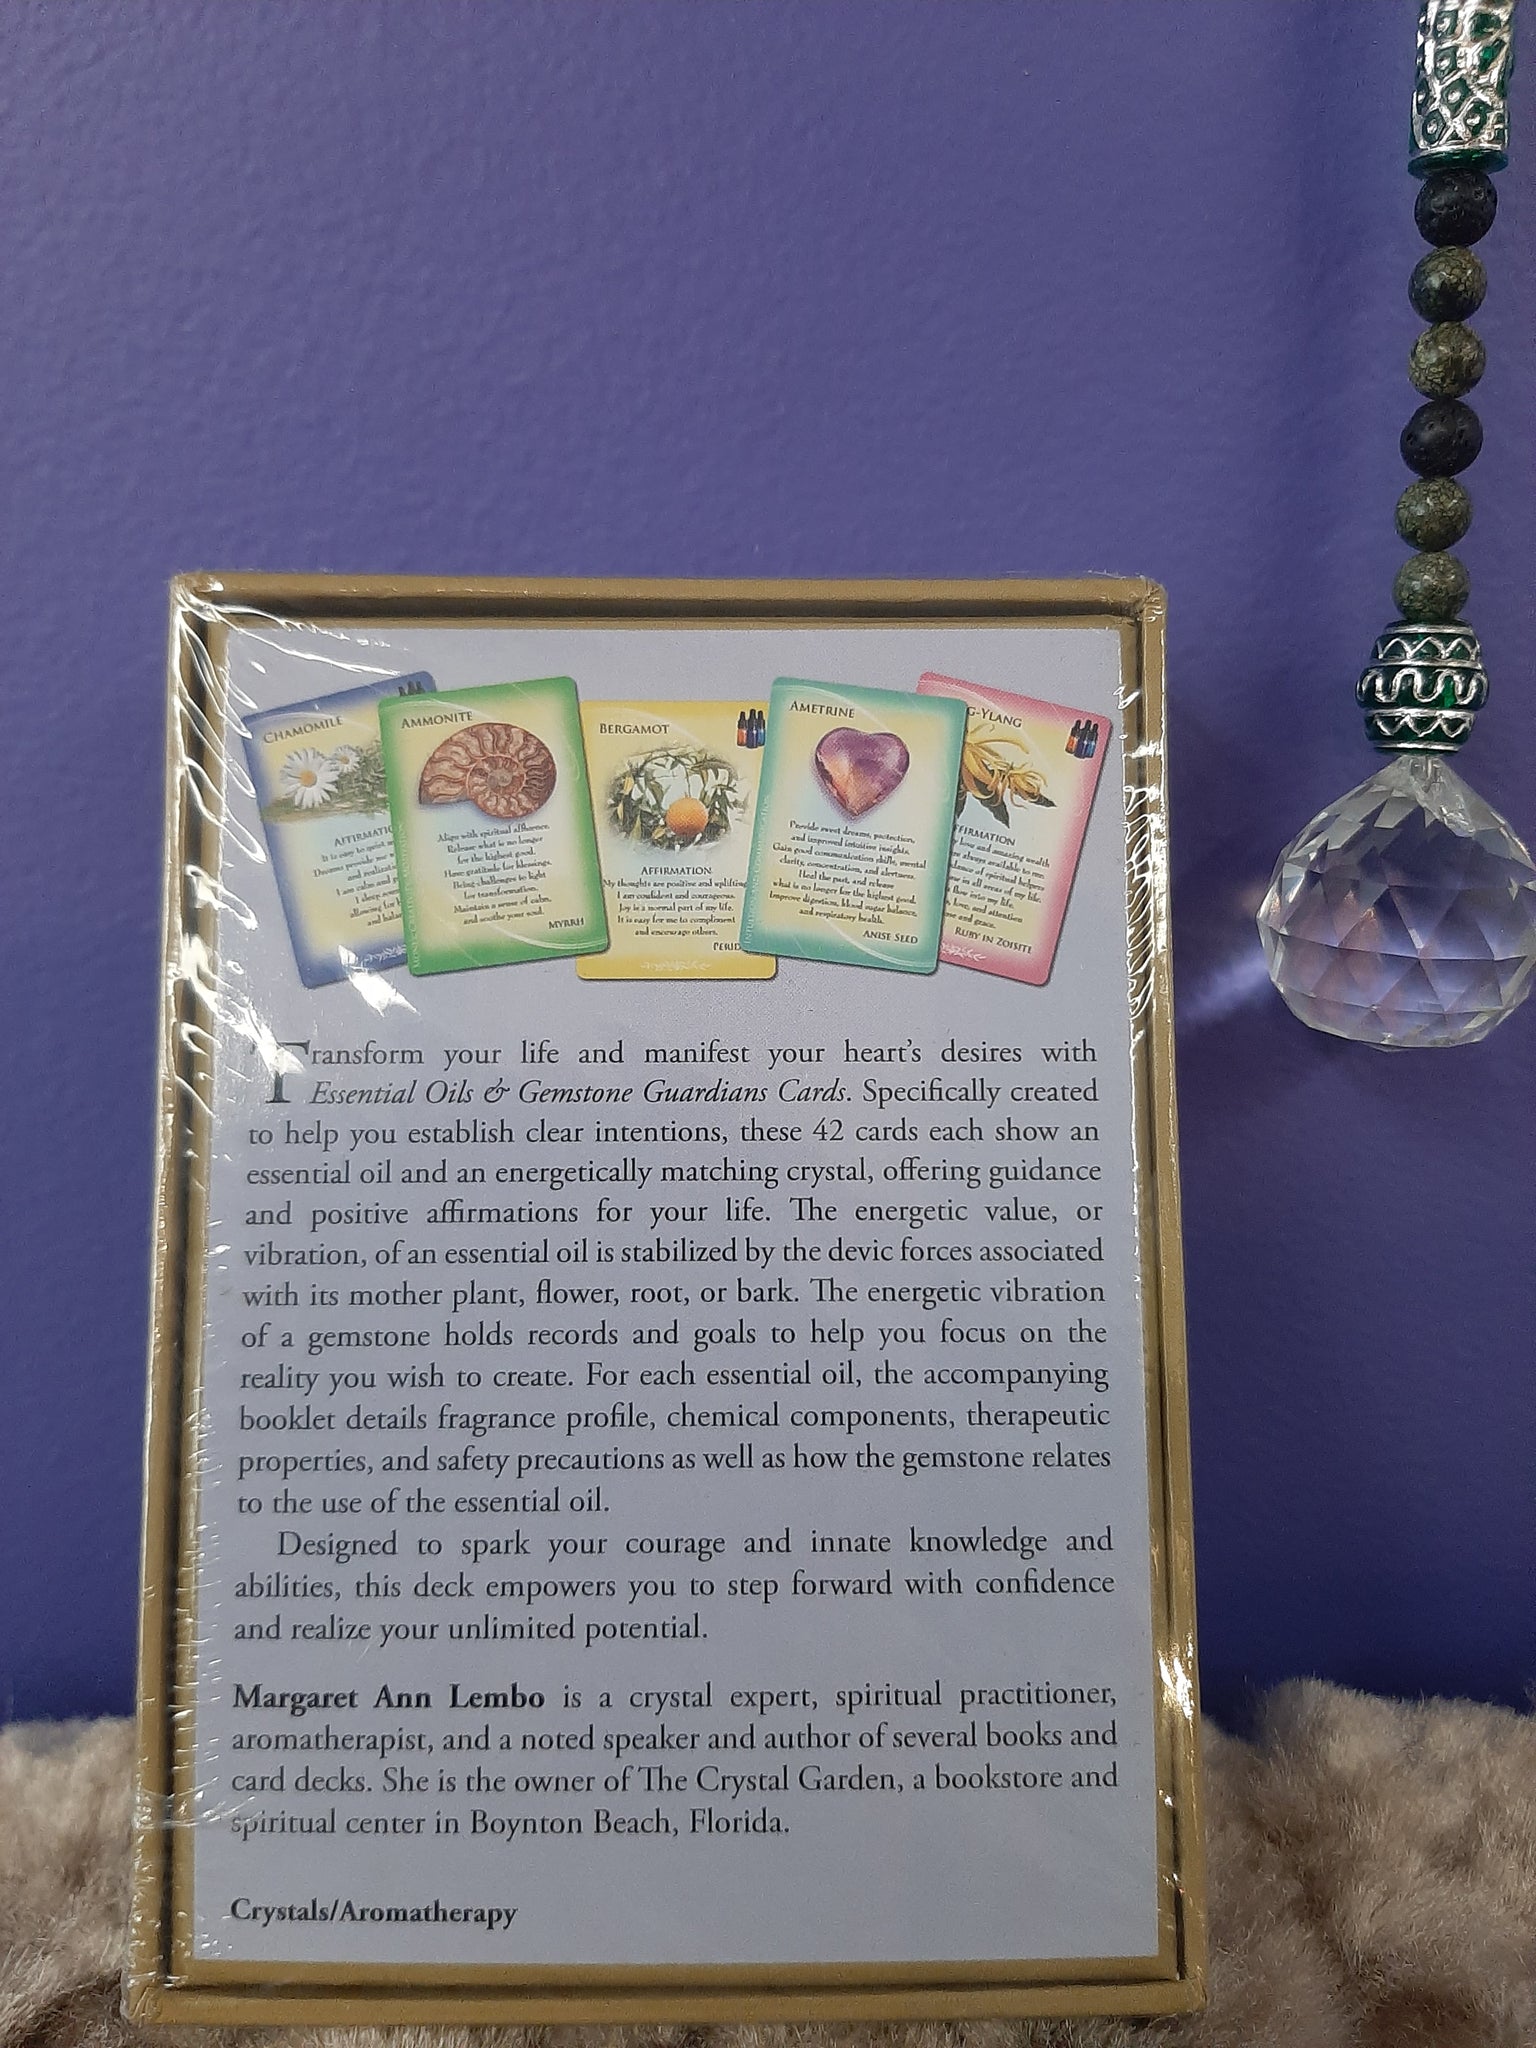 ESSENTIAL OILS AND GEMSTONE GUARDIANS CARDS